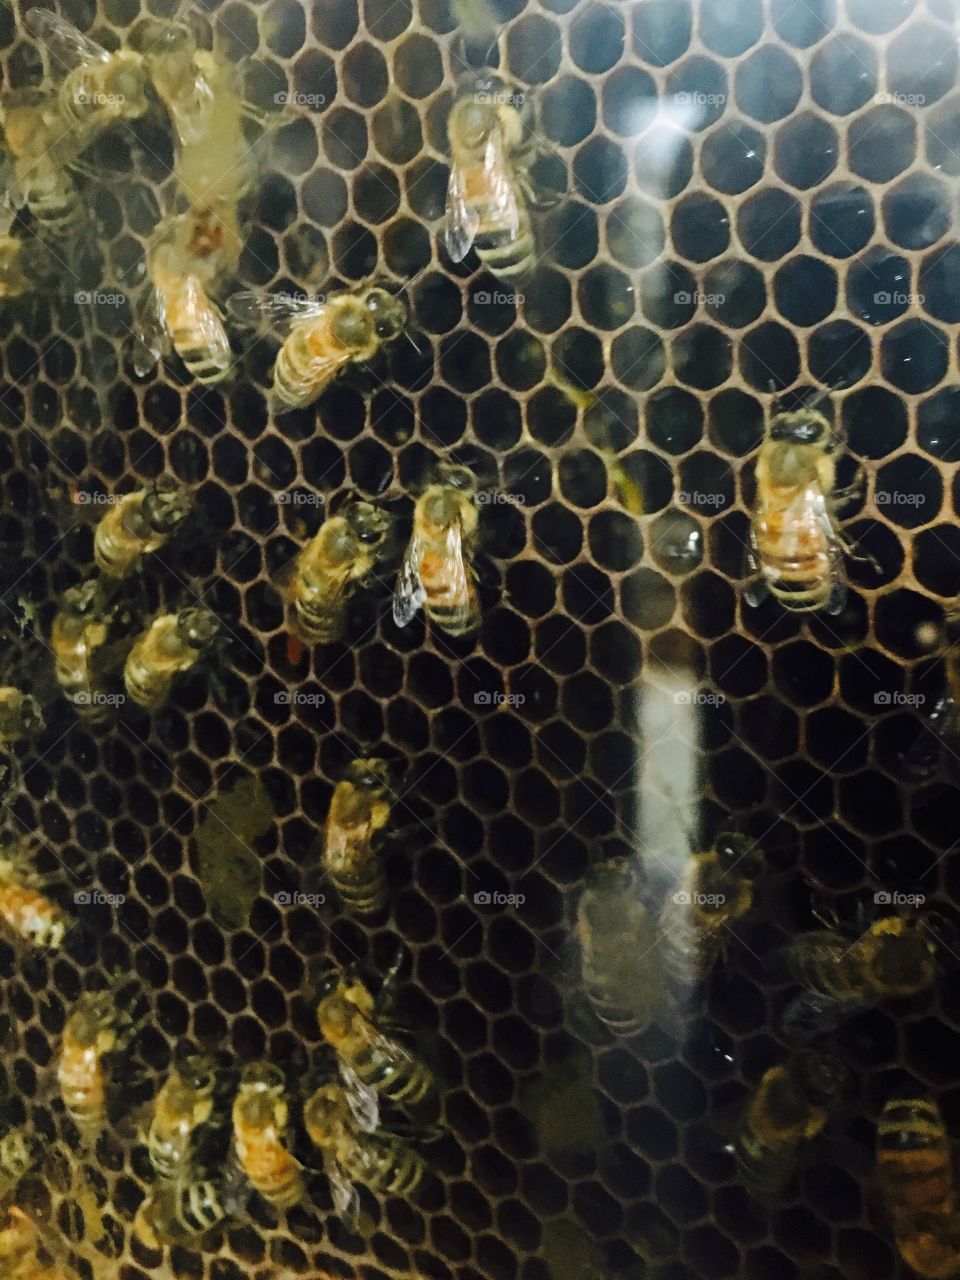 Bees and their Honey Comb